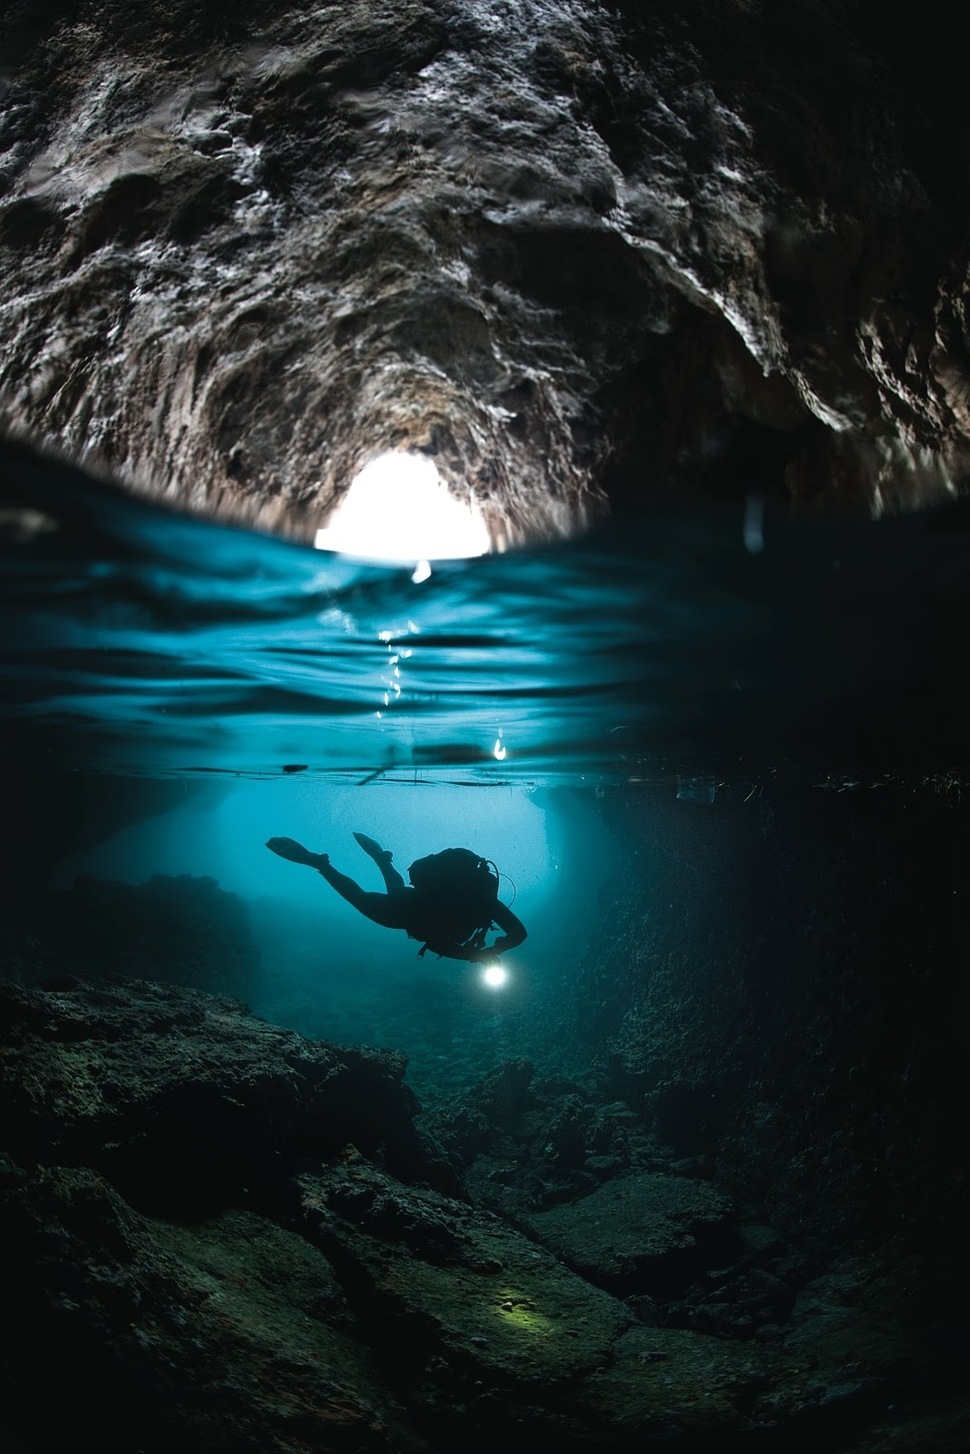 AD-Incredible-Photos-That-Reveal-A-Glimpse-Of-What-Lies-Beneath-The-Waters-Surface-23